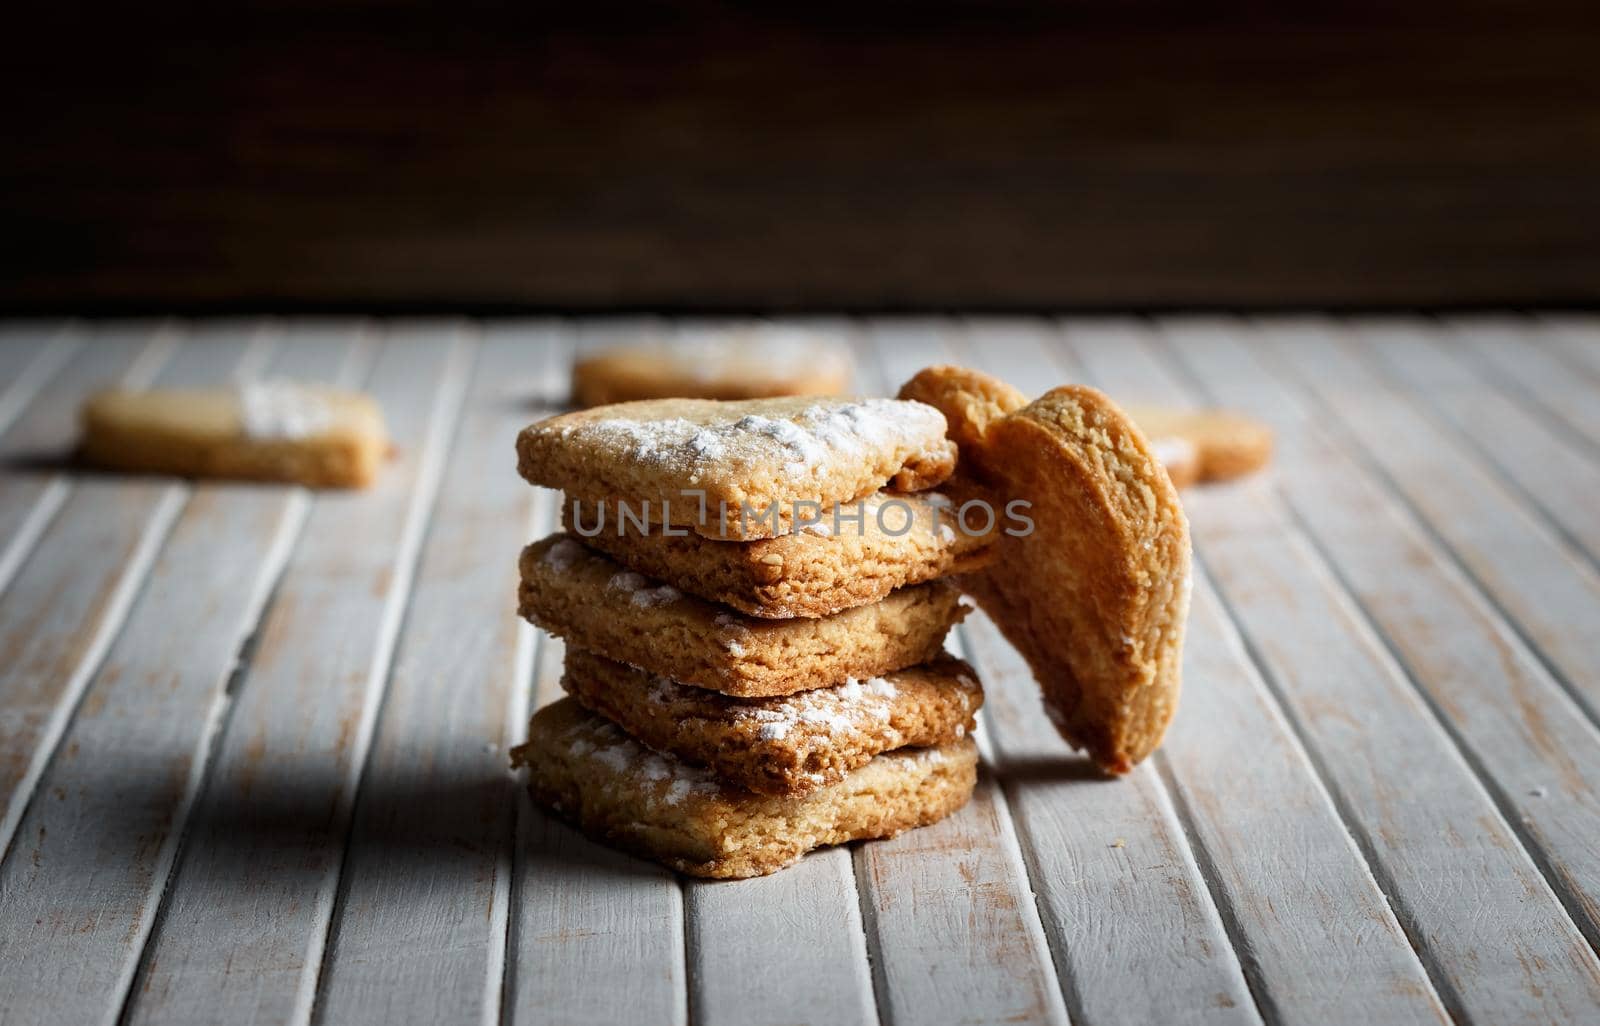 Delicious home-made heart-shaped cookies sprinkled with icing sugar in a wooden board. Horizontal image. Dark moody style.